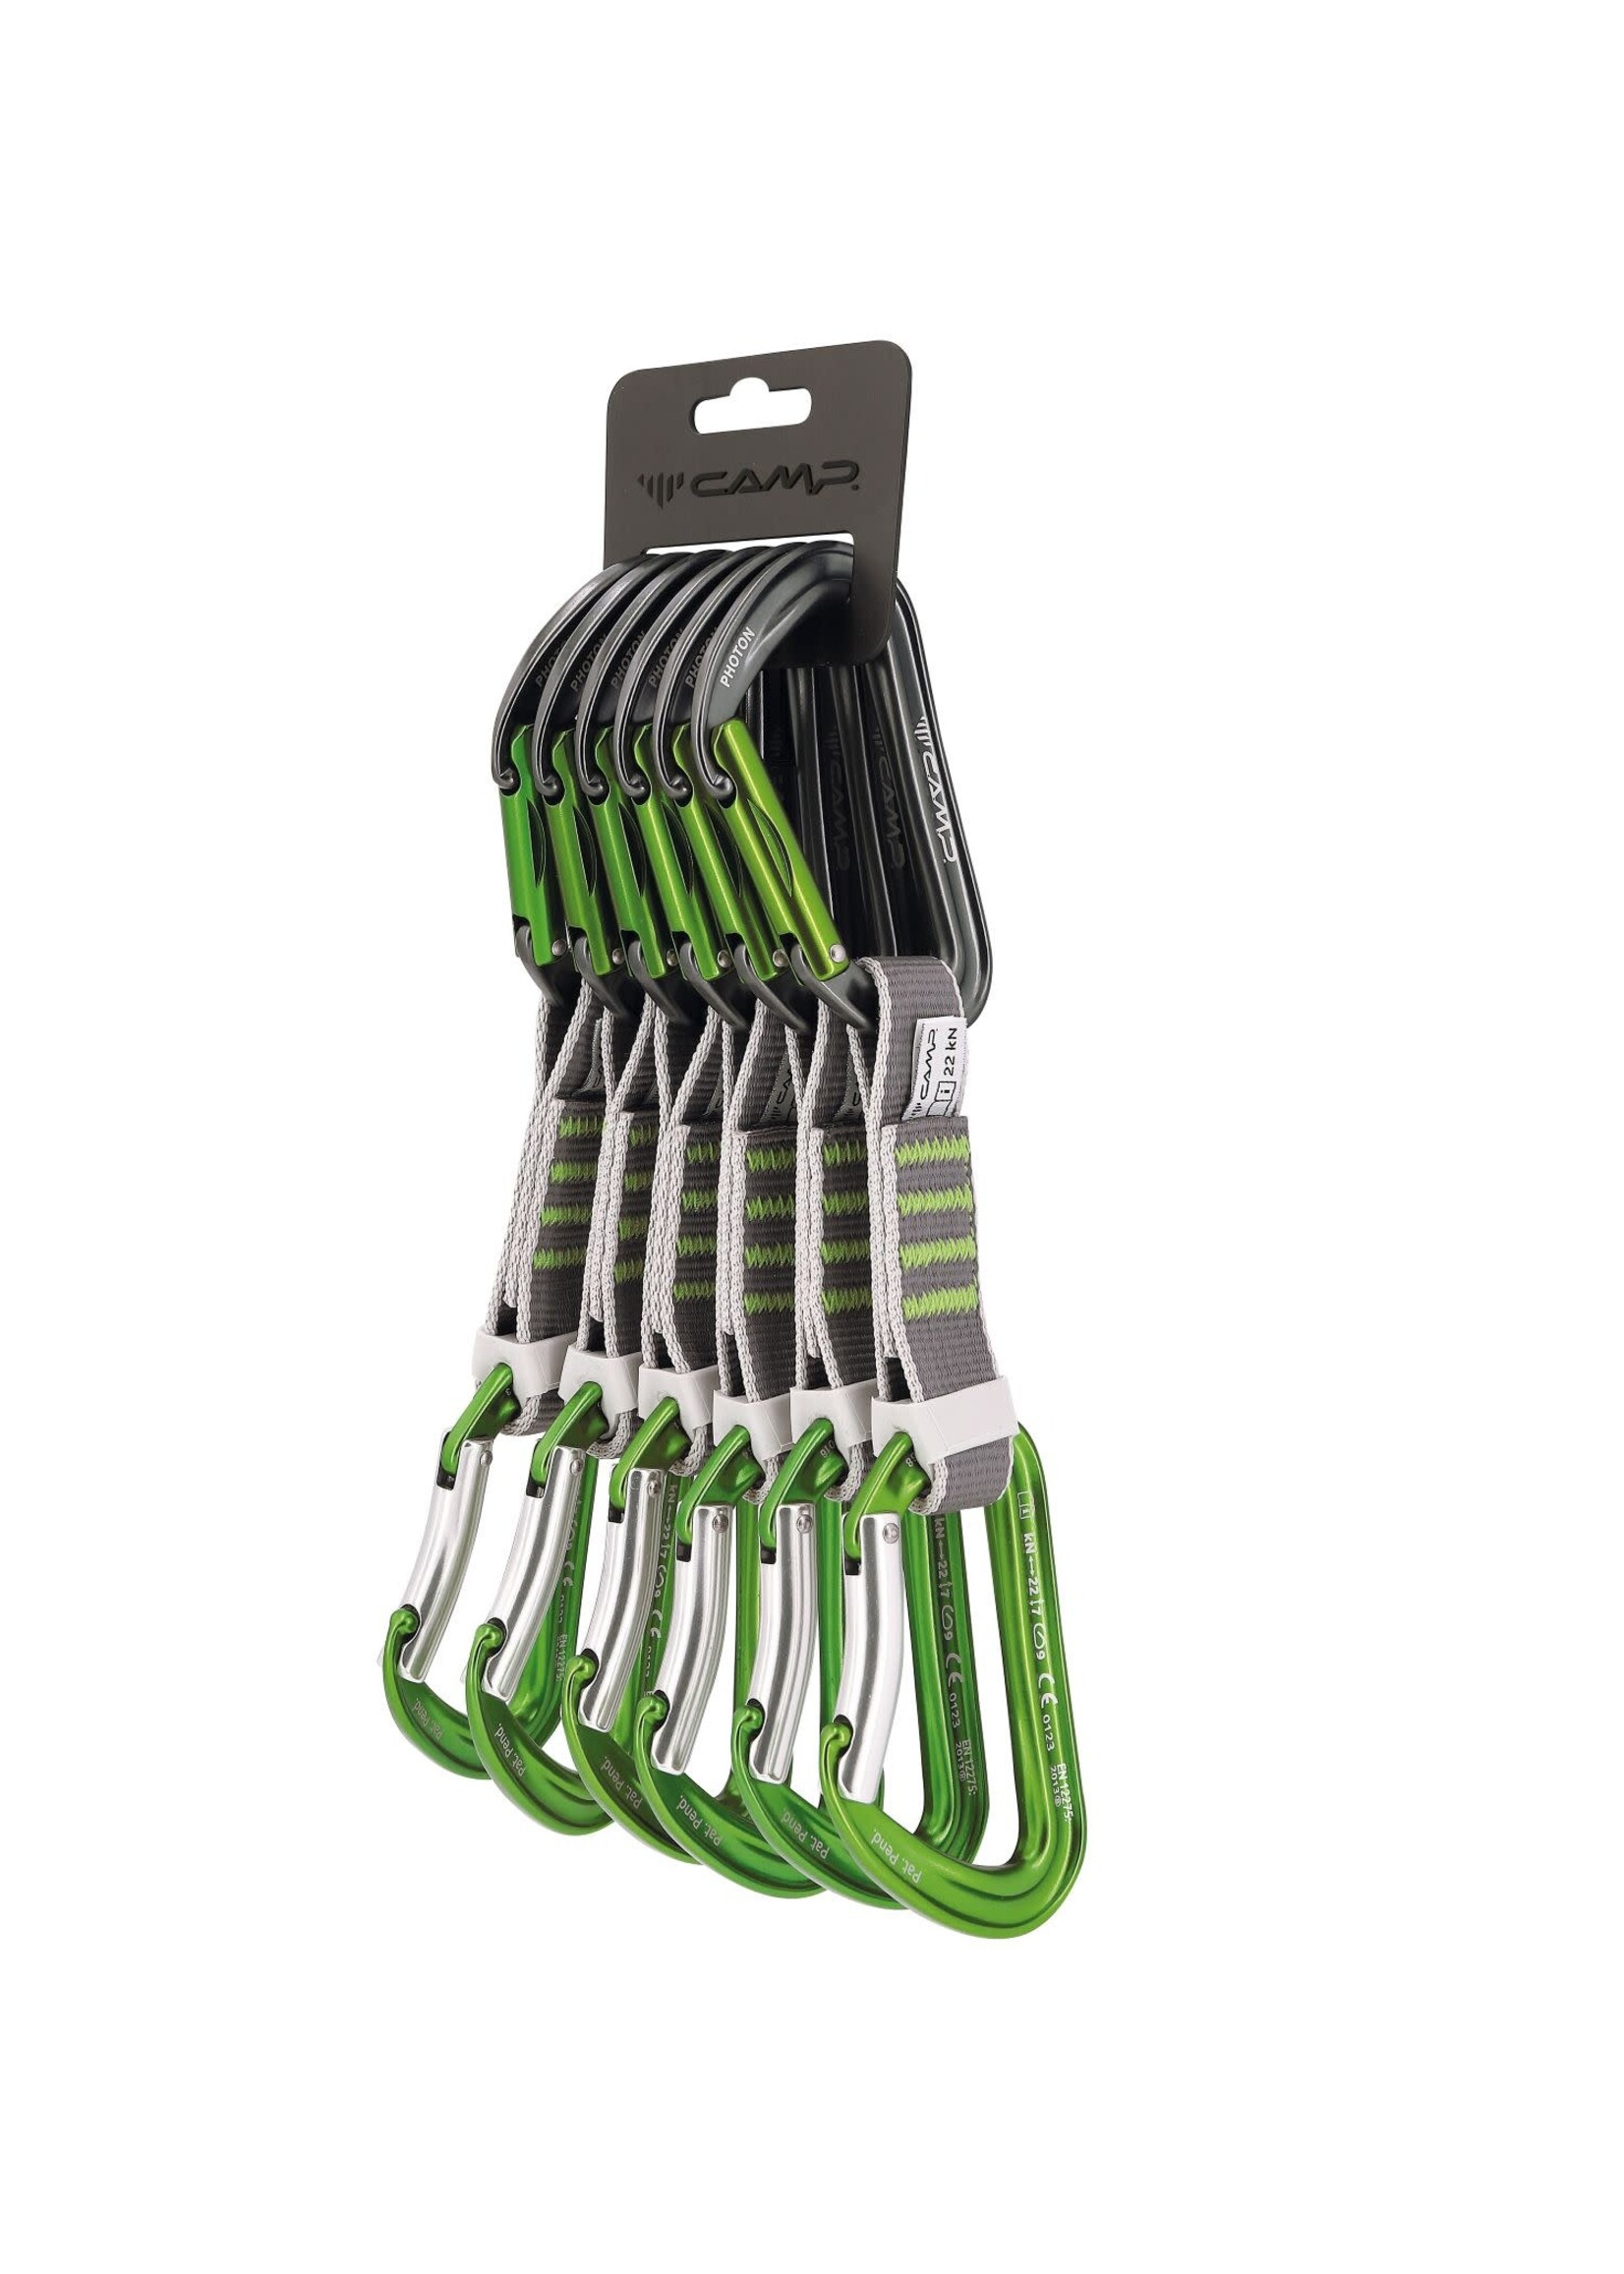 Camp Camp Photon Express Quickdraw 11 cm - 6 Pack